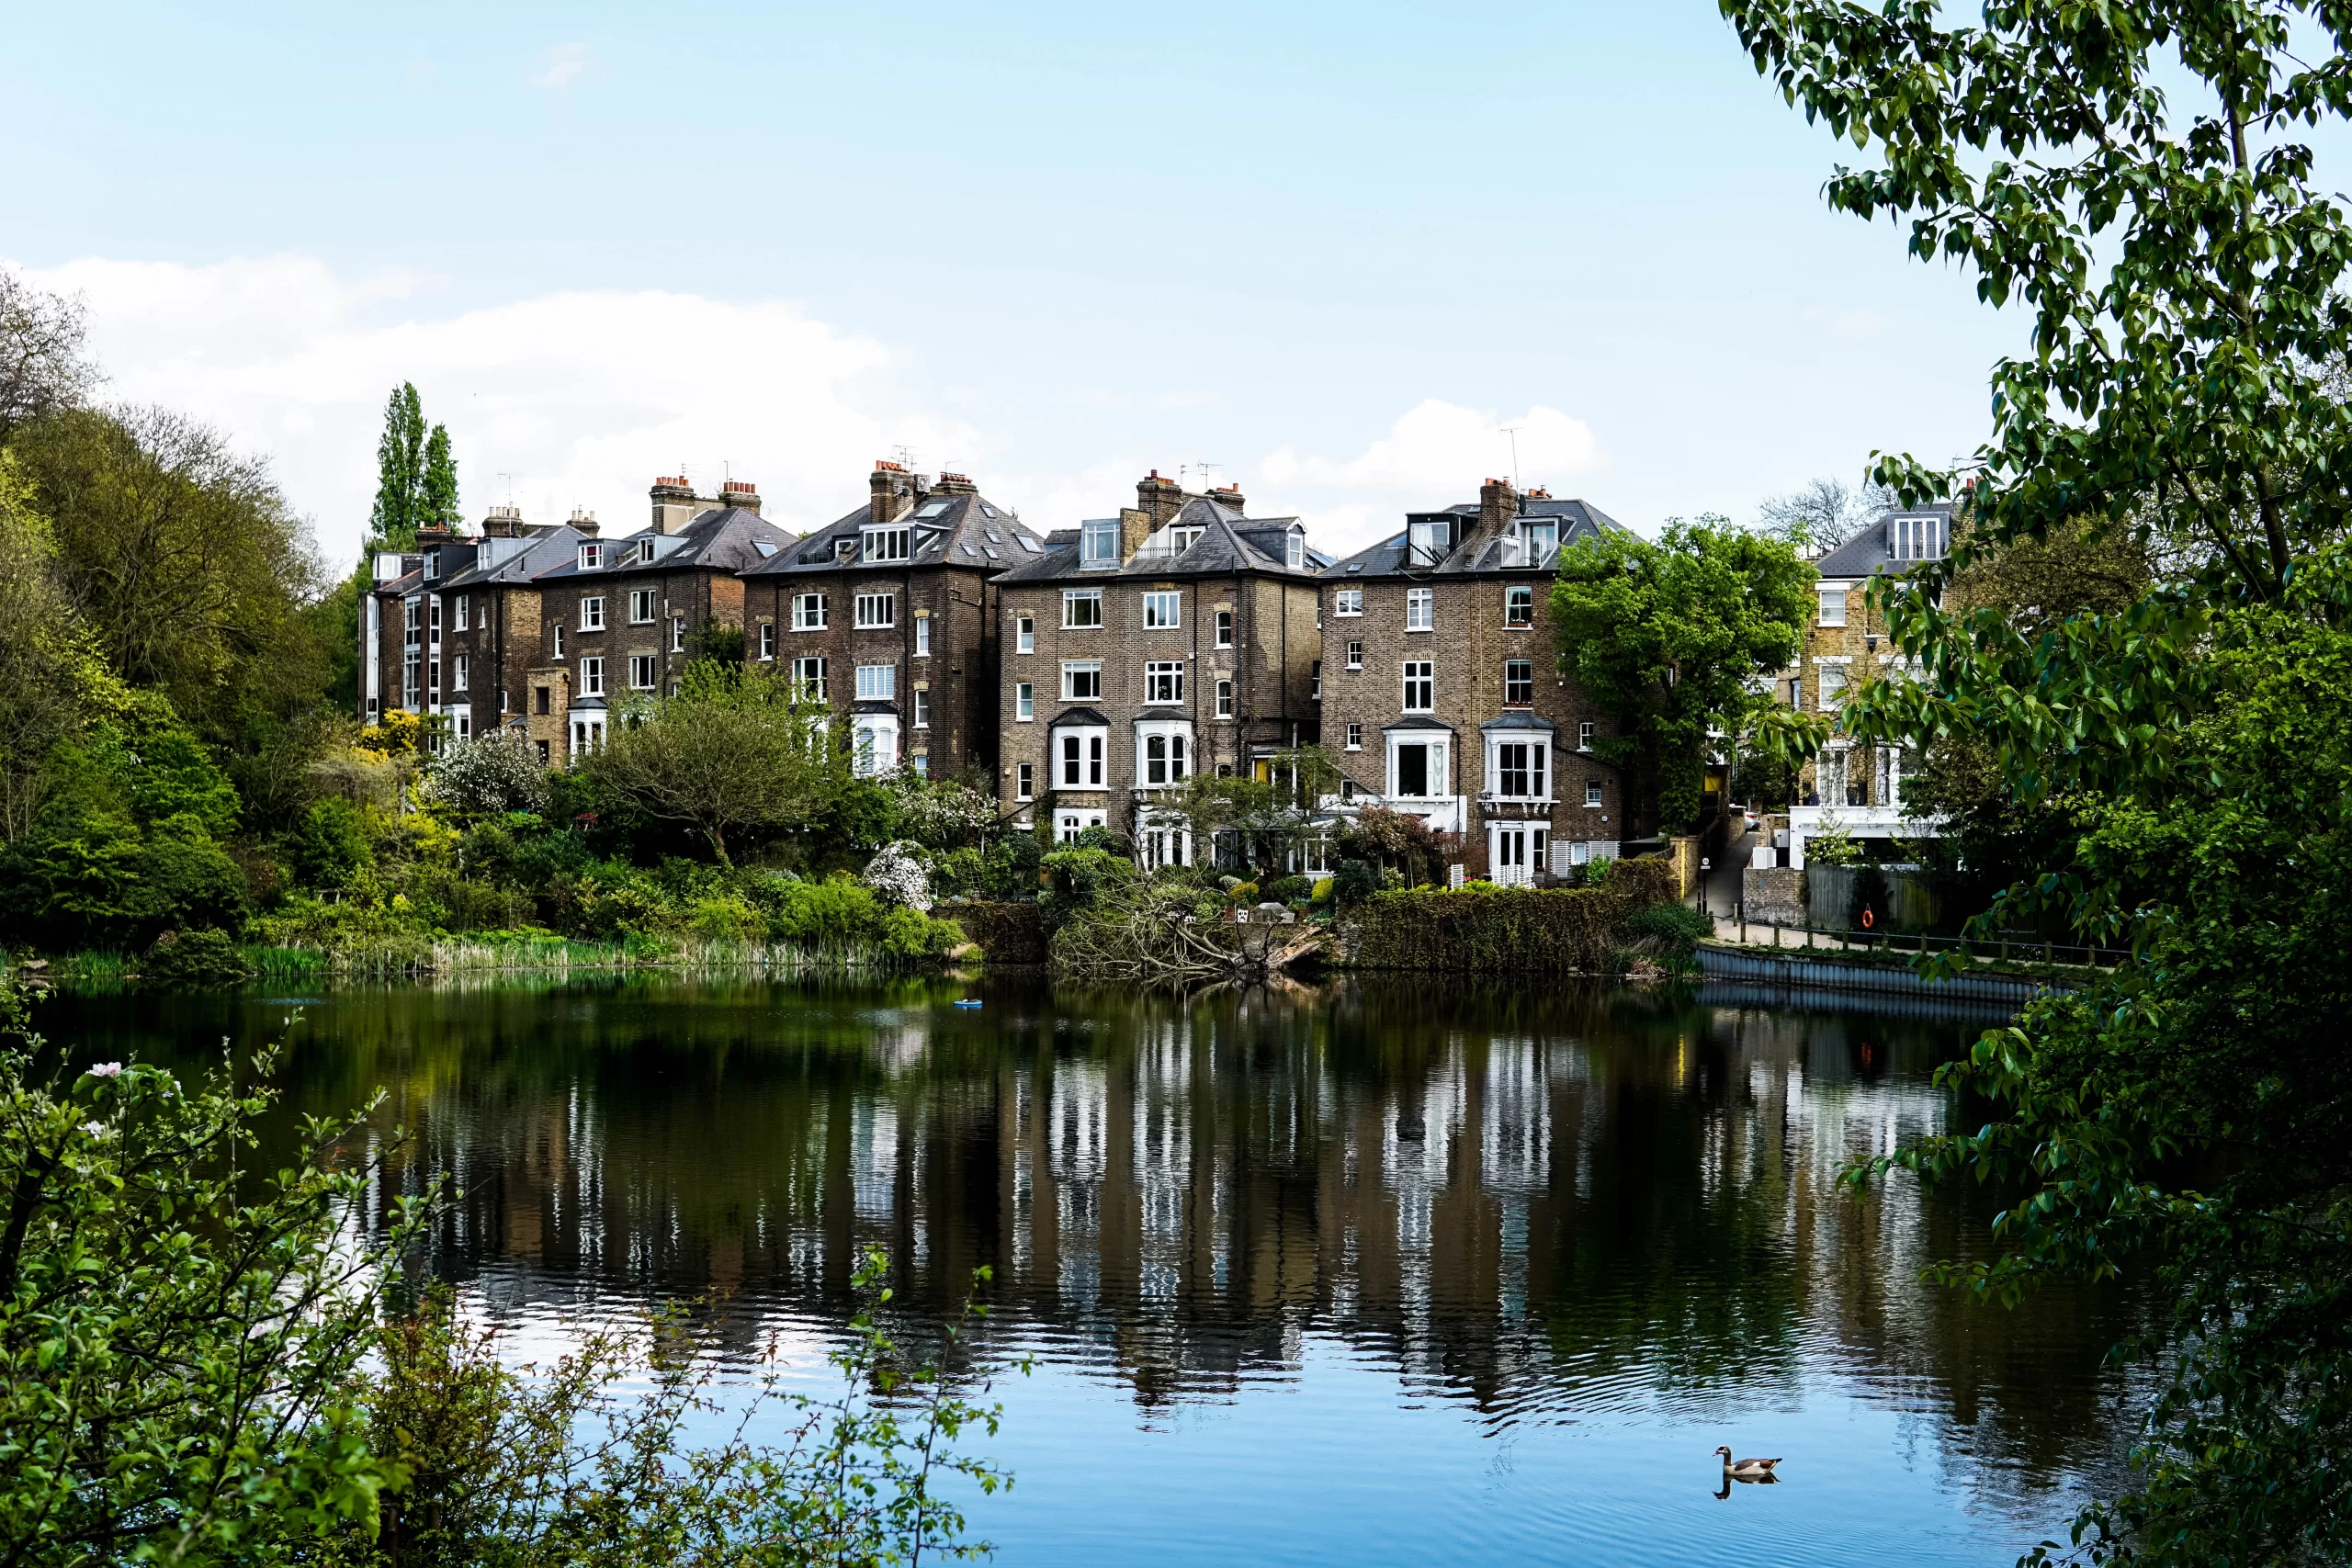 Hampstead Heath, London, United Kingdom Published on June 1, 2017 SONY, ILCE-6000 Free to use under the Unsplash License Walking along the river in Hampsted Heath public park found in London, a friend said it is her dream house, to have a view of the park and the river. I decided to capture that moment.